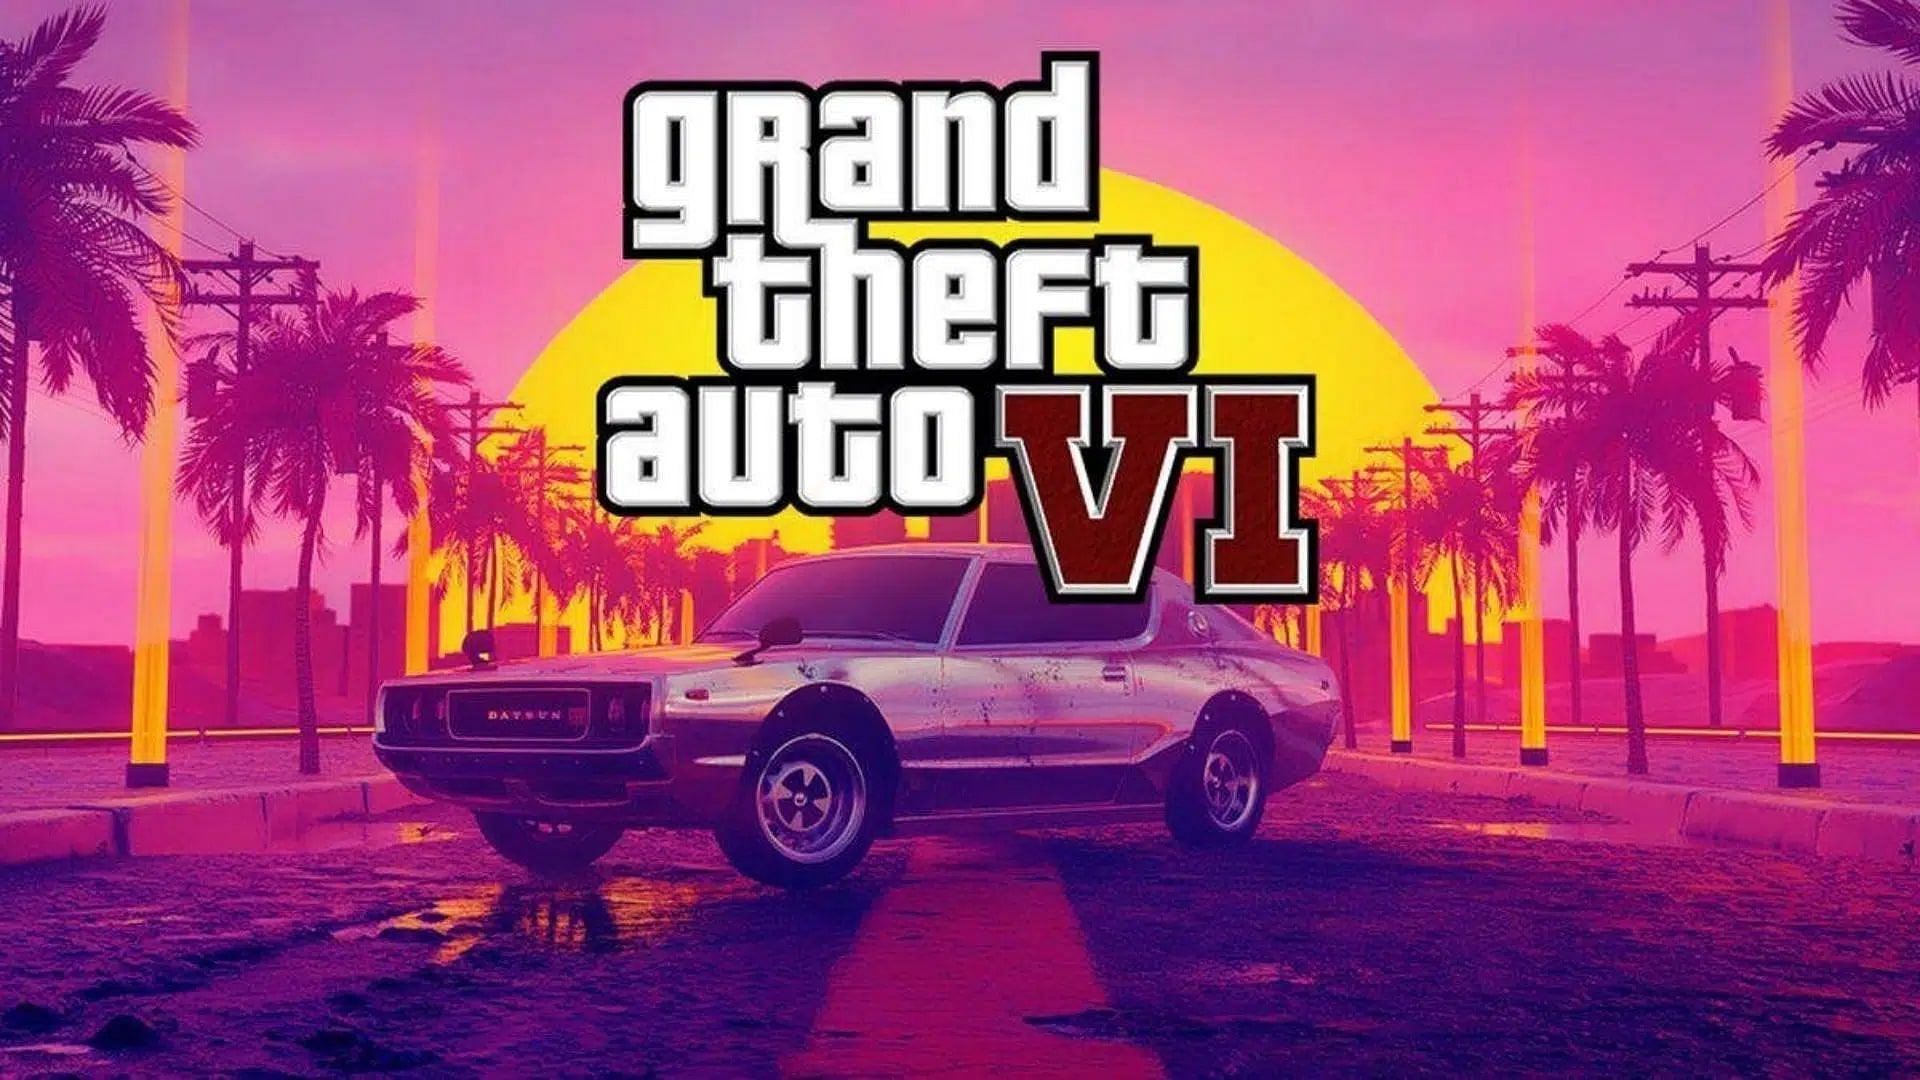 No official logo has been revealed yet (Image via r/GTA6)